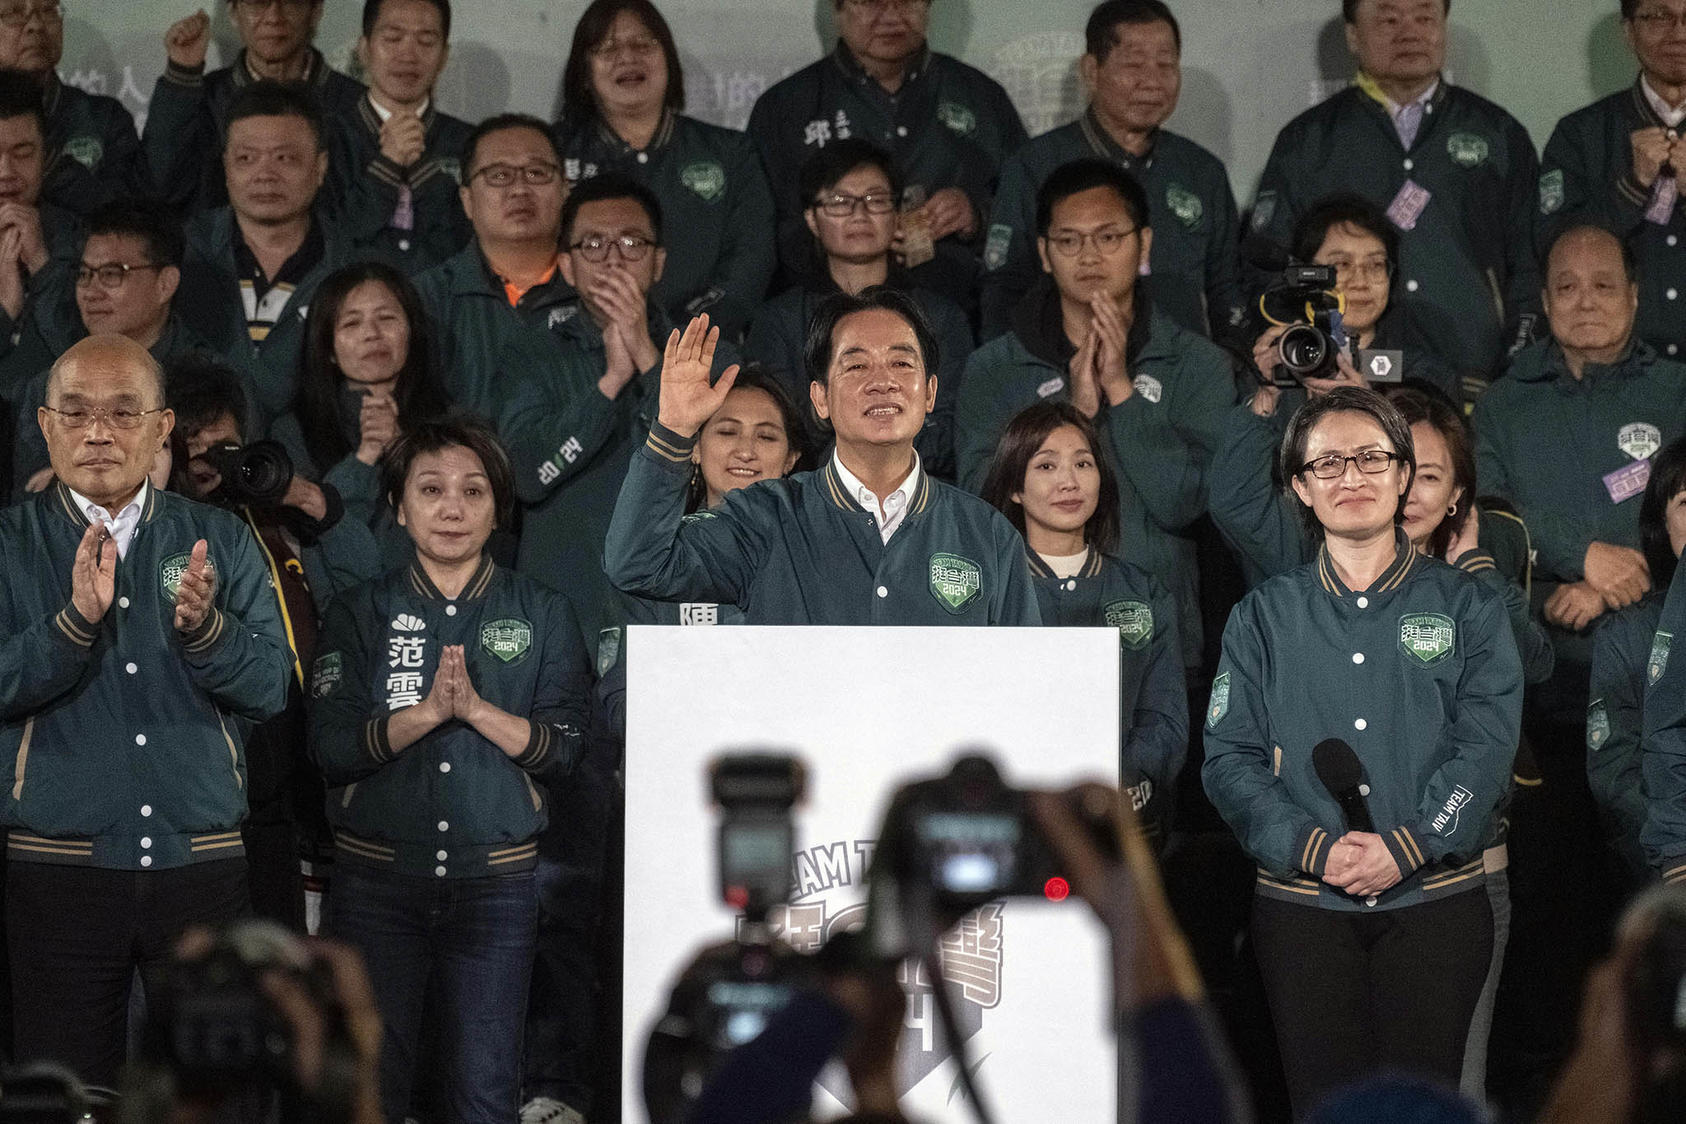 The Democratic Progressive Party’s Lai Ching-te, center, was elected the next president of Taiwan on January 13, 2024. Tensions over the island’s status are likely to strain U.S.-China relations. (Lam Yik Fei/The New York Times)